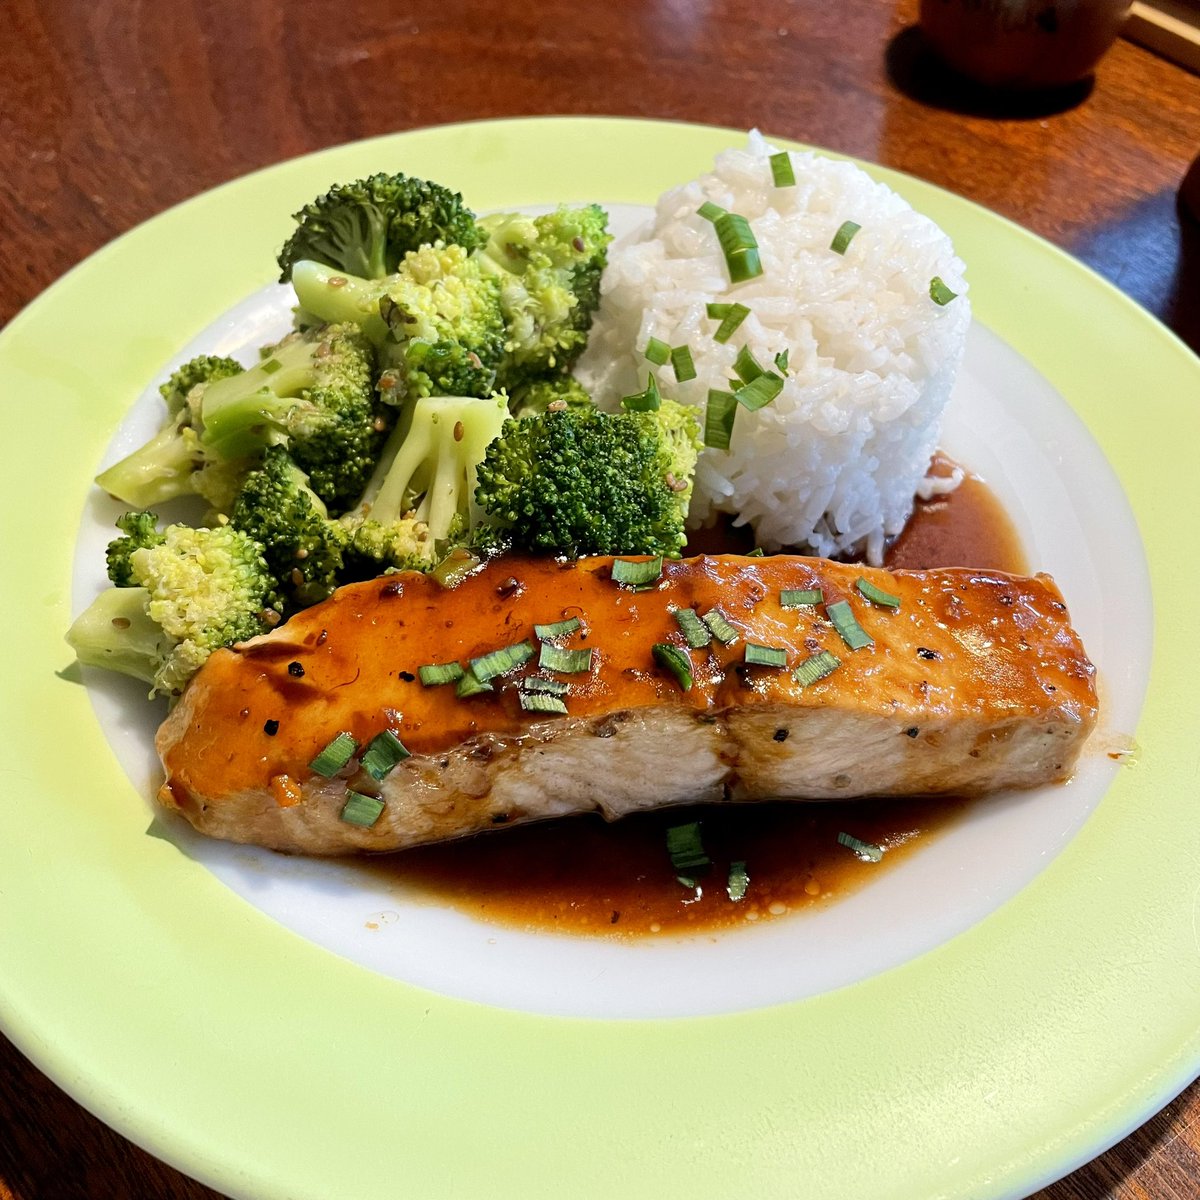 Reintroducing fave foods (like broccoli) w/out trigger foods (like garlic).
Salmon drizzled w/ soy, tamarind, ginger & sesame oil.
#healthyeating #homecooking #lowfodmap